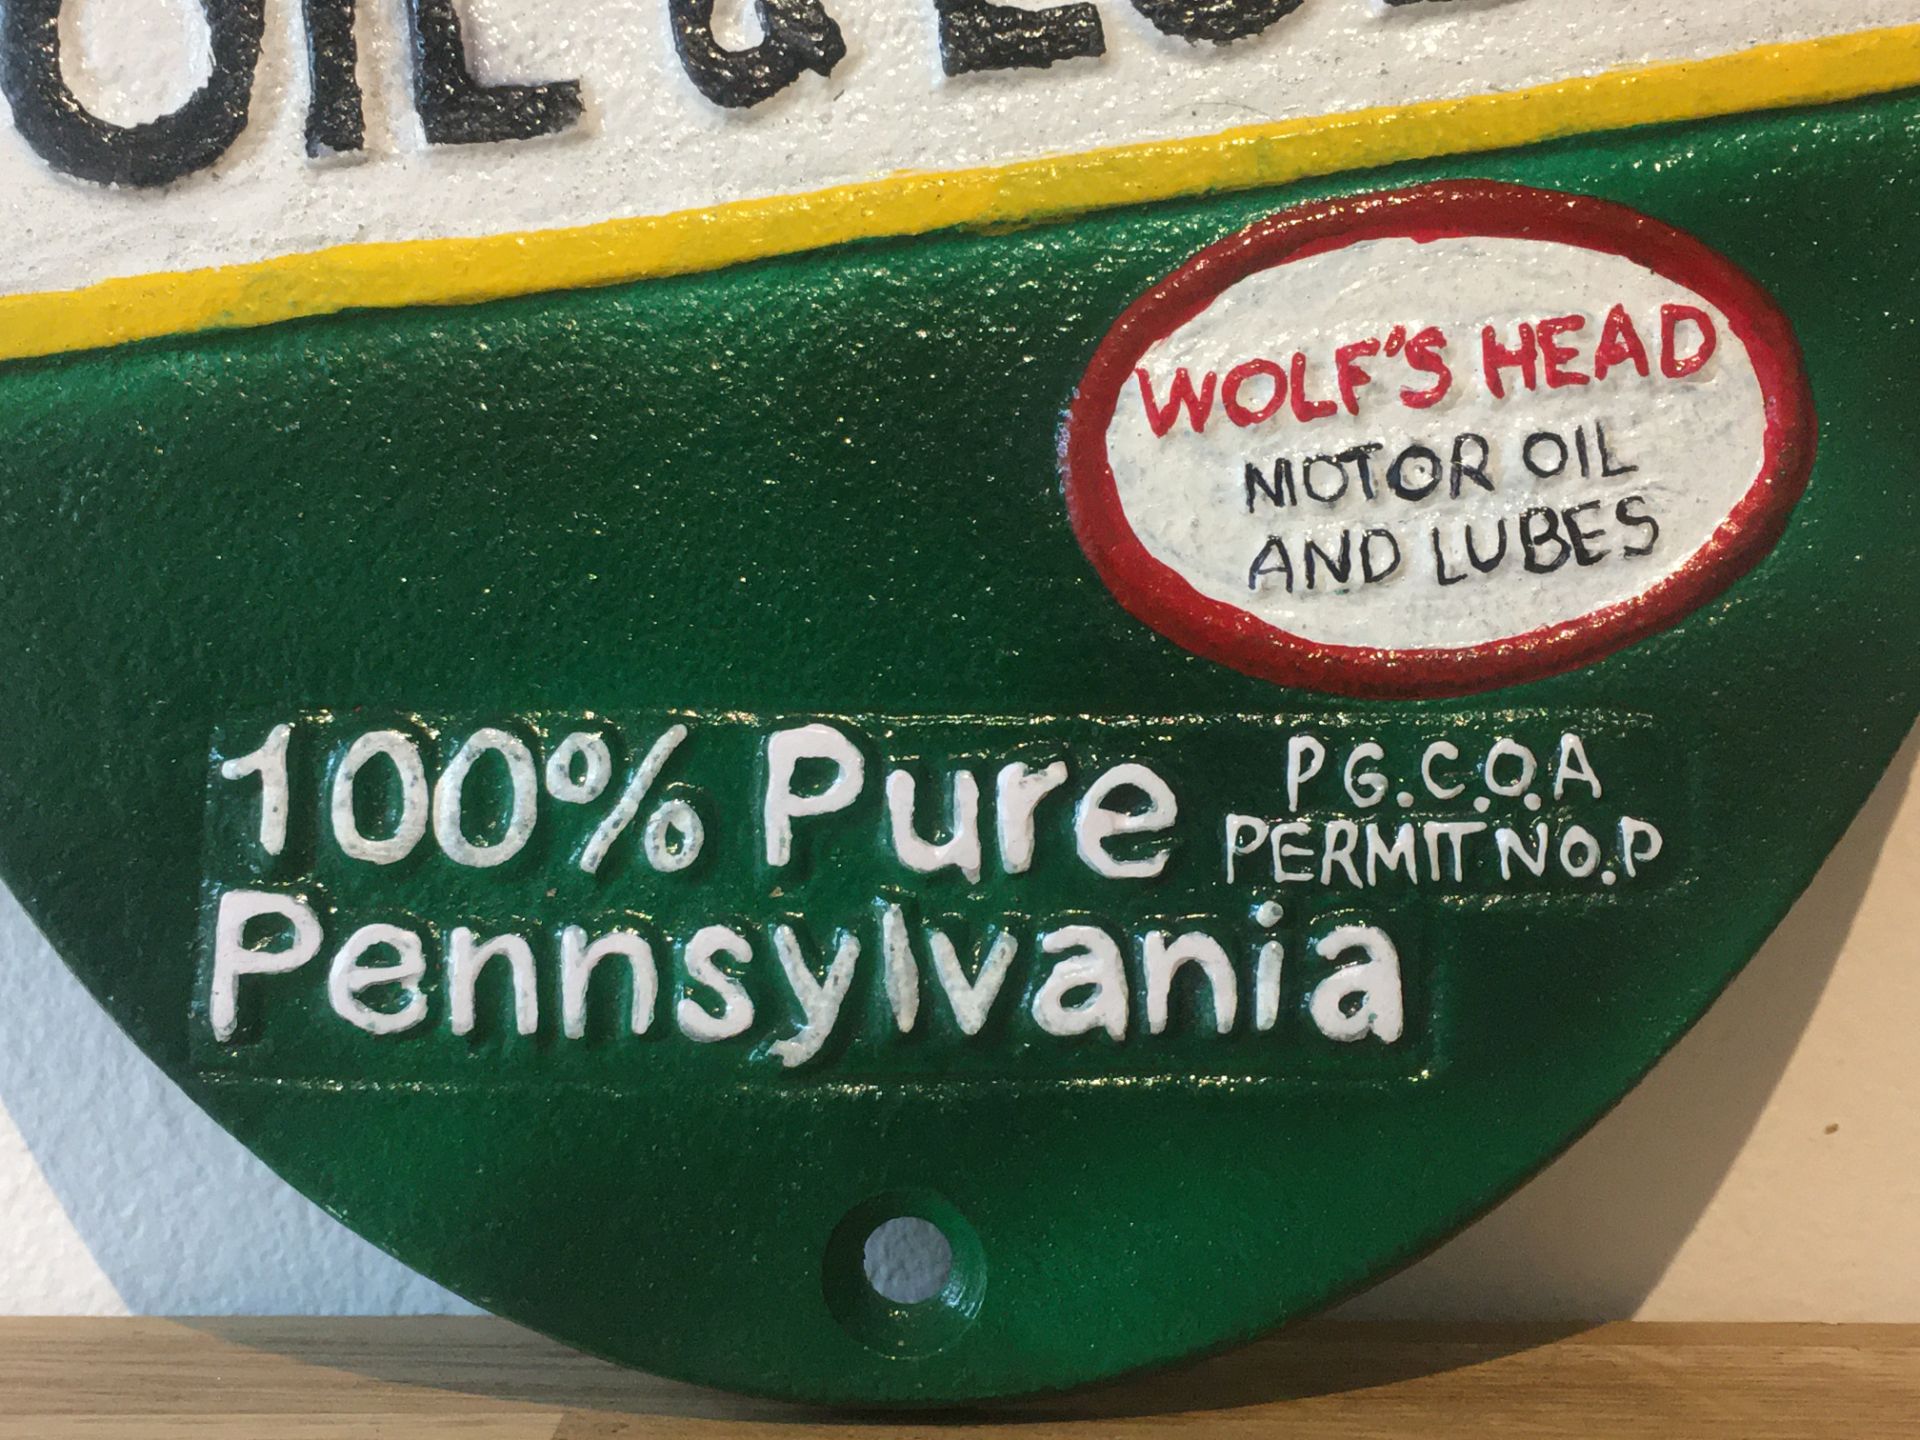 Wolf Head 'Oil & Lubes' Cast Iron Sign - Image 5 of 5